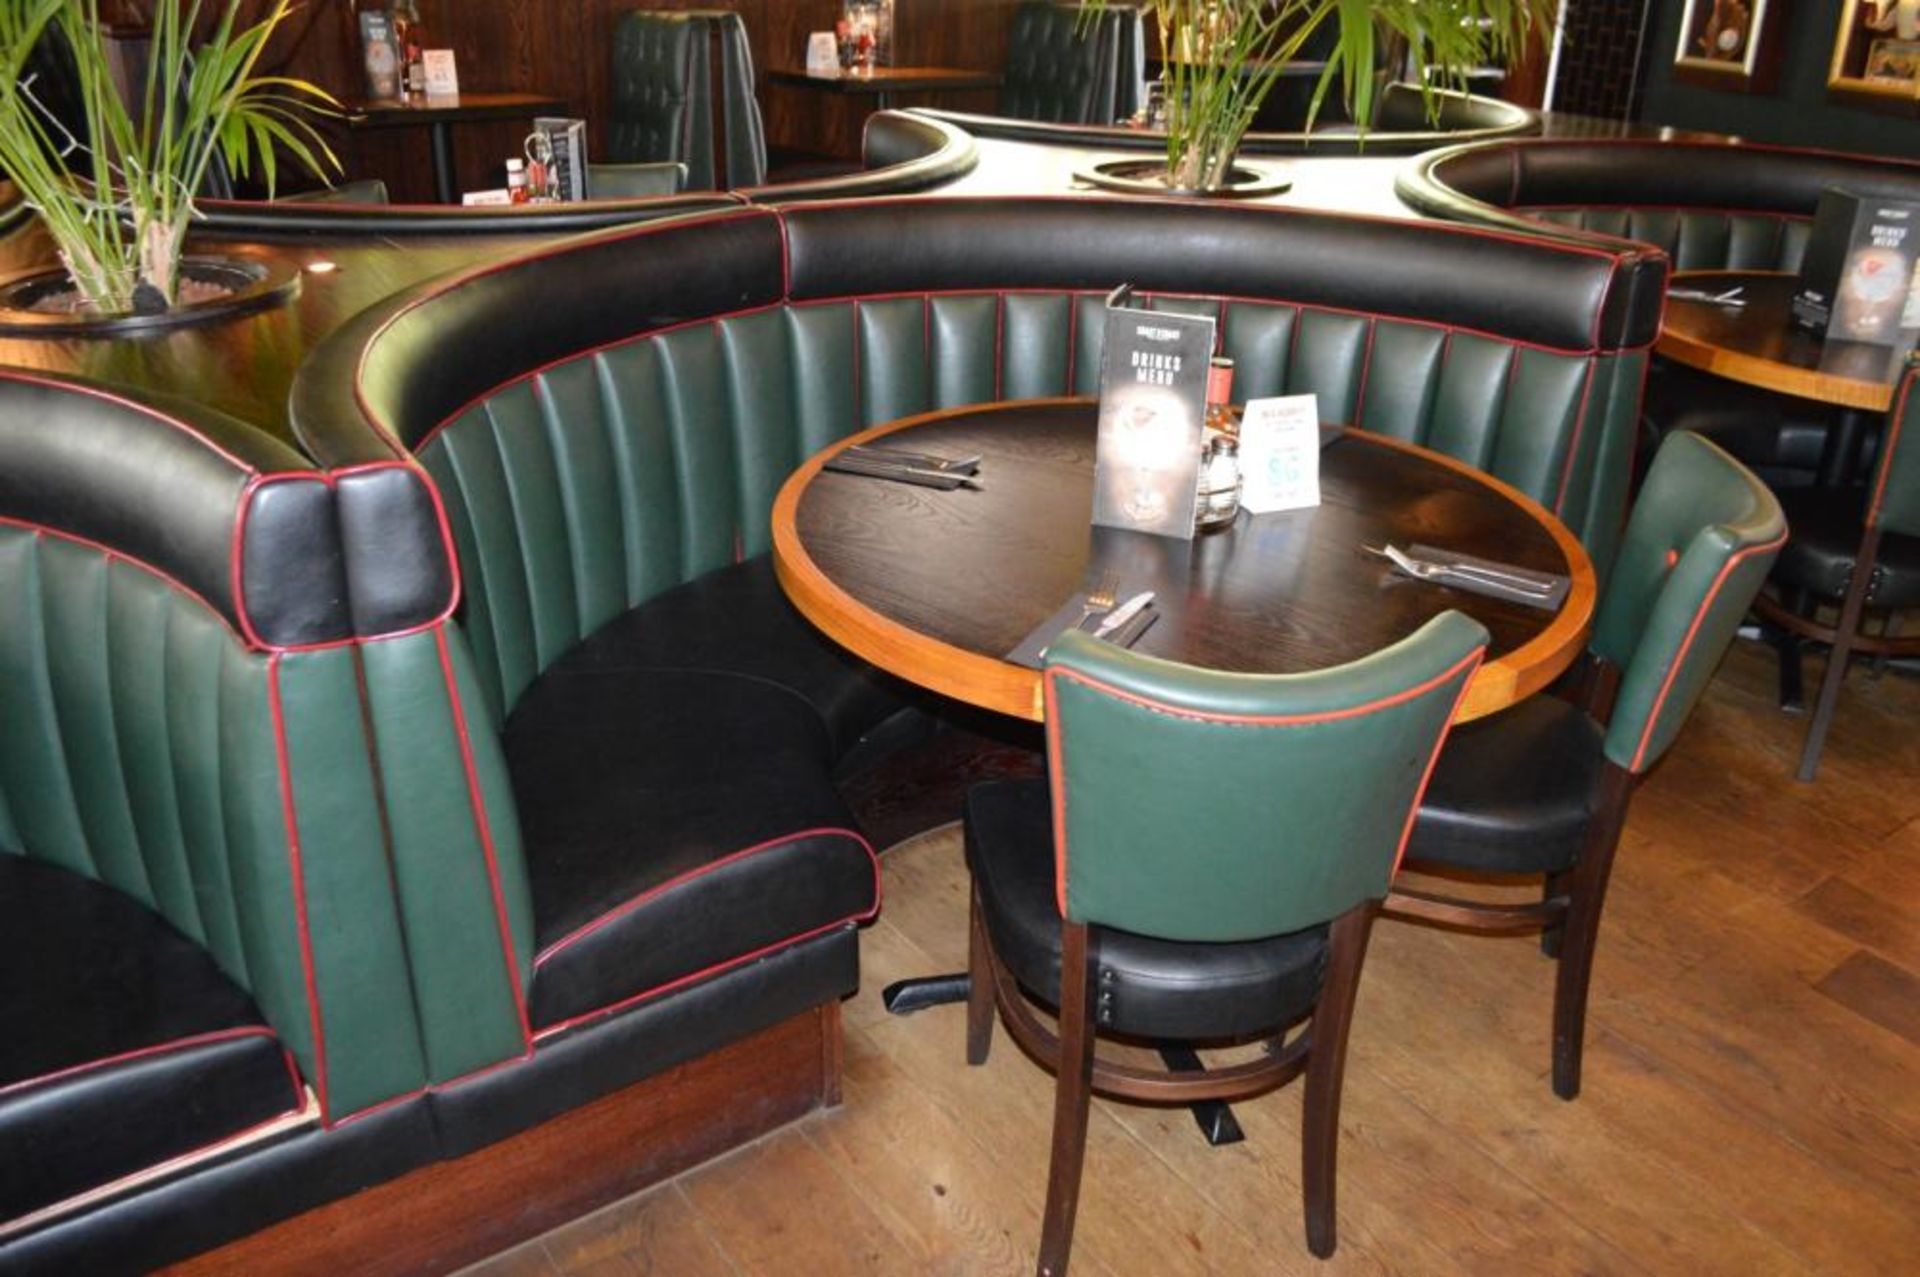 1 x Restaurant C-Shape 4 Person Seating Booth - Green and Black Vertical Fluted Back Upholstery - Image 3 of 4